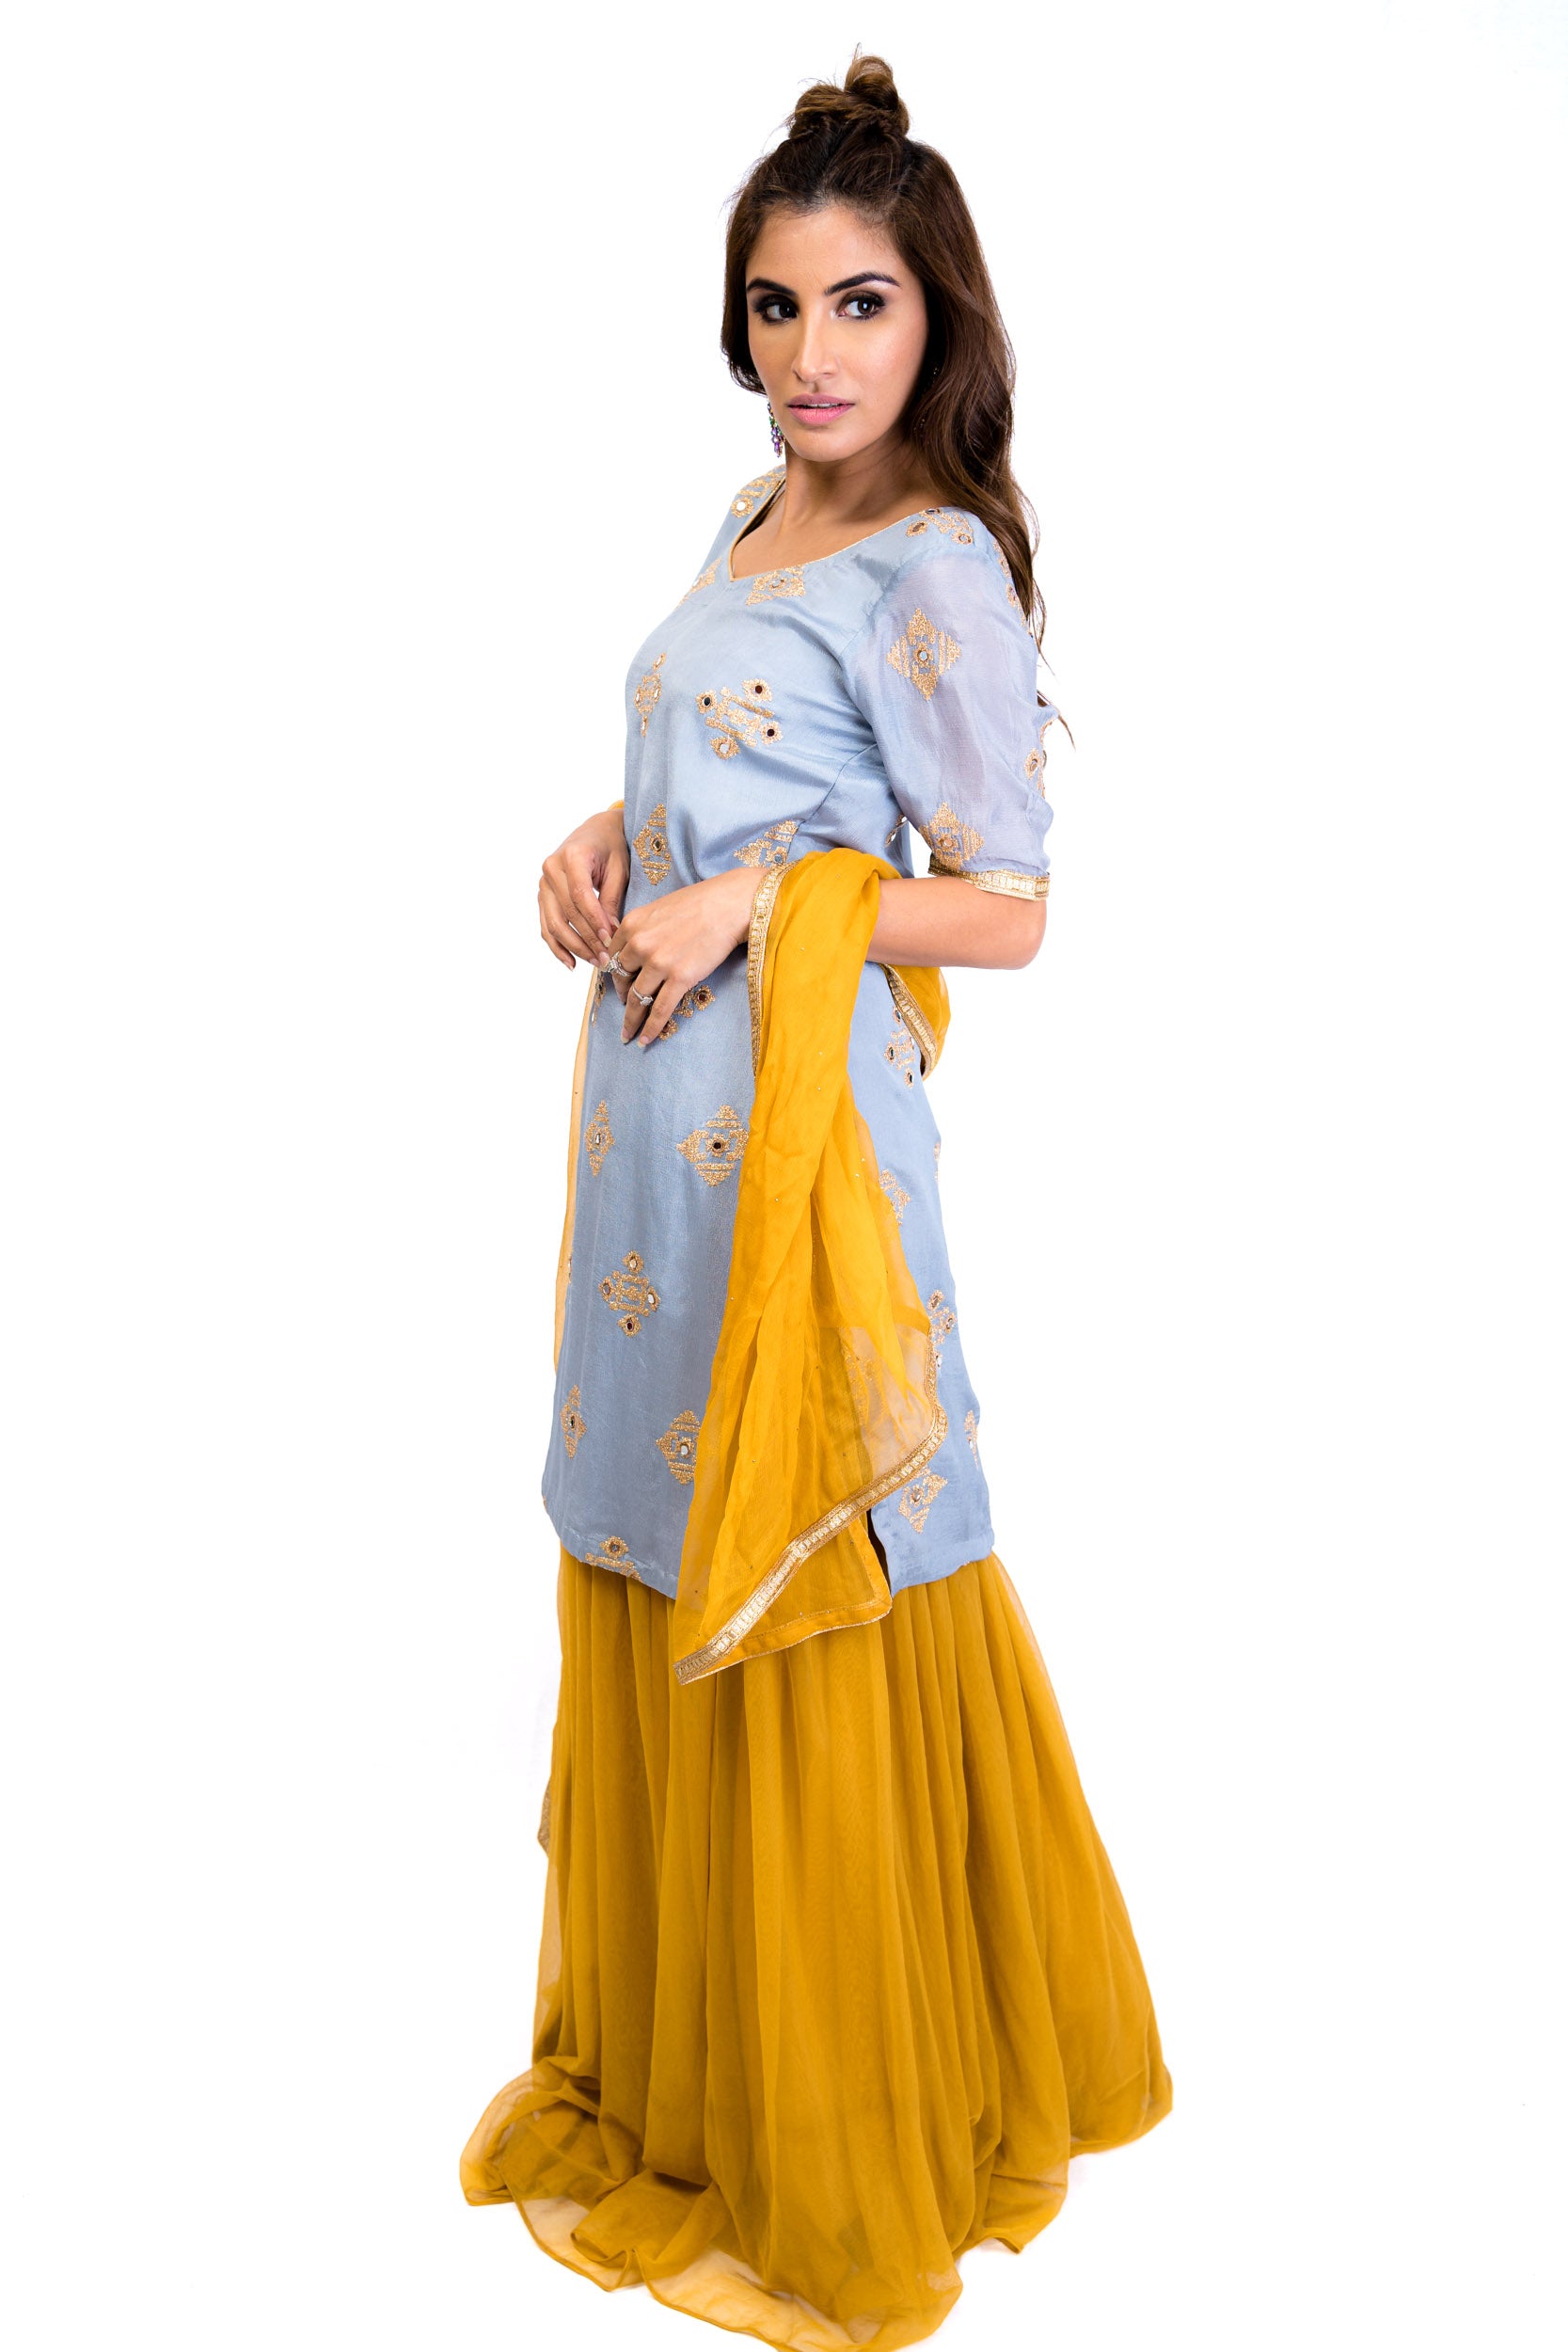 Pastel Blue and Mustard Lengha